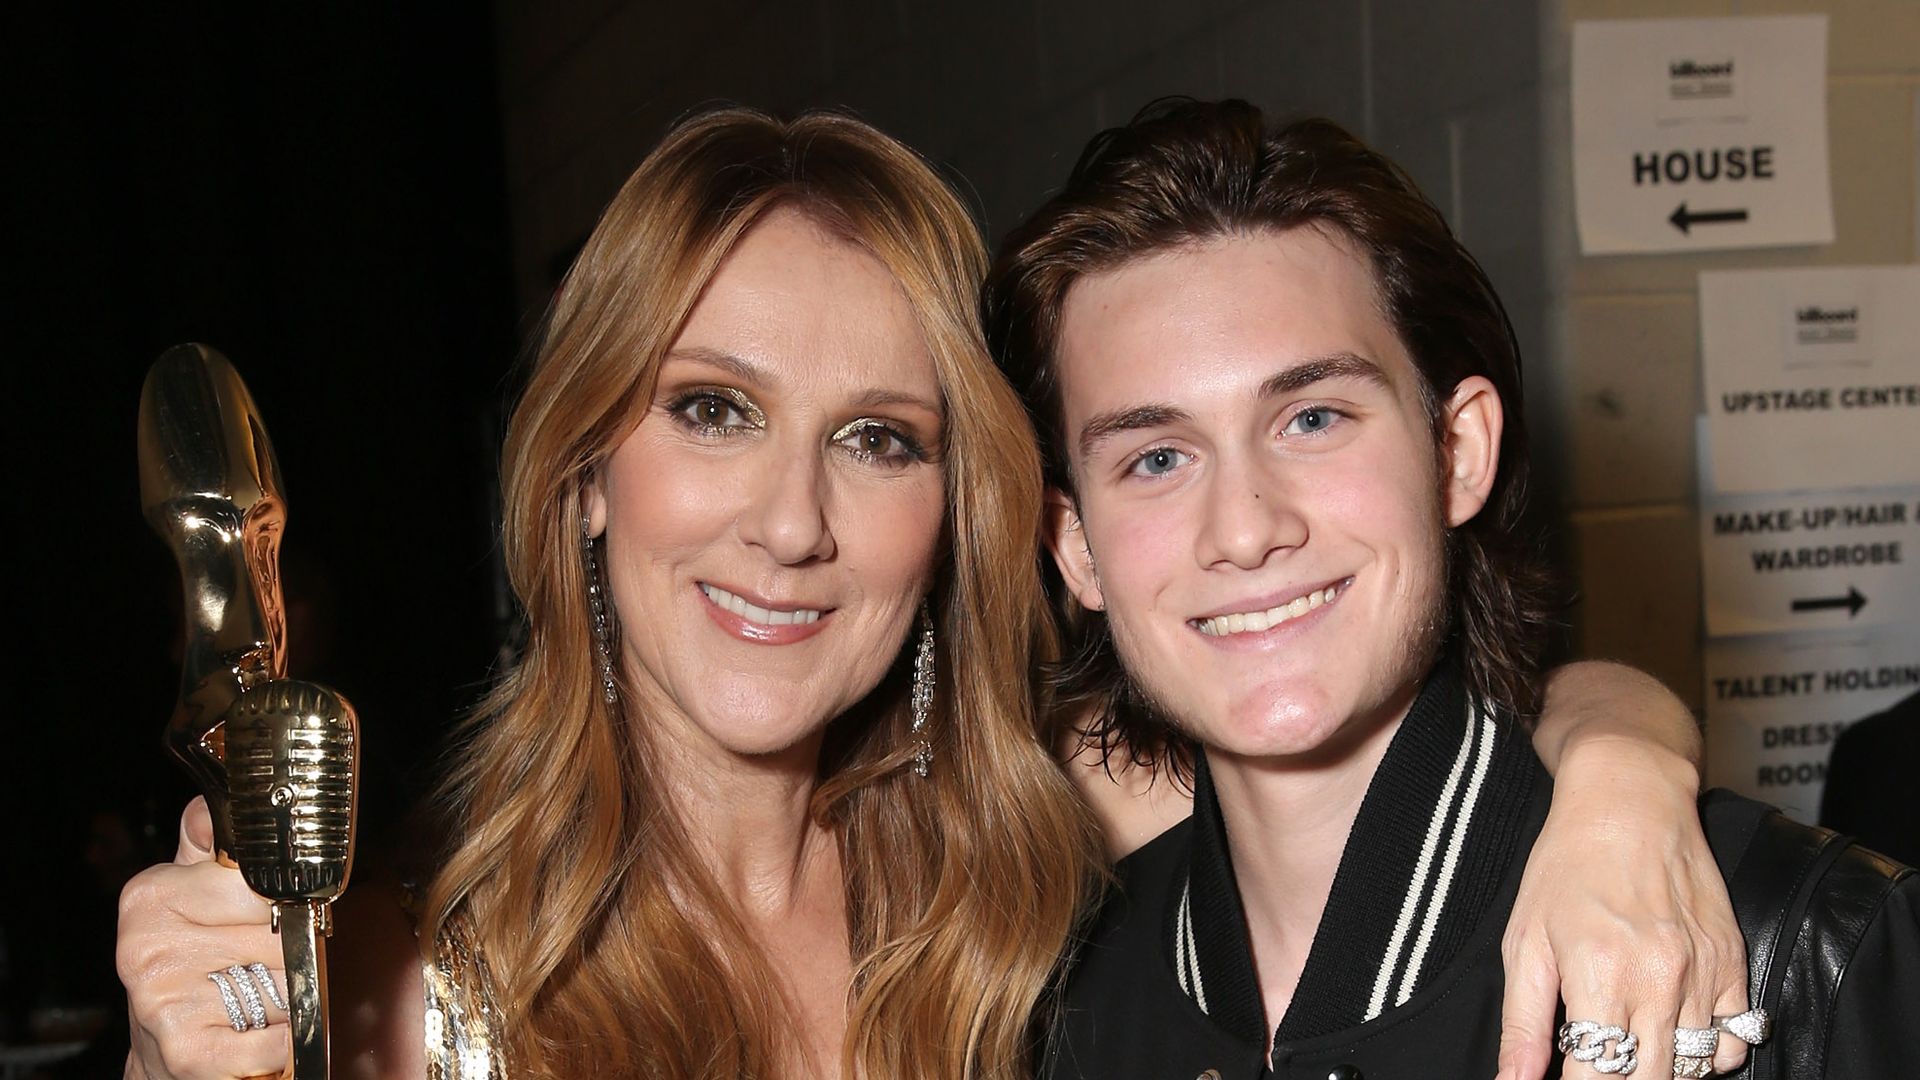 Celine Dion, recipient of the Billboard Icon Award, and son Rene-Charles Angelil backstage at the 2016 Billboard Music Awards at the T-Mobile Arena on May 22, 2016 in Las Vegas, Nevada.